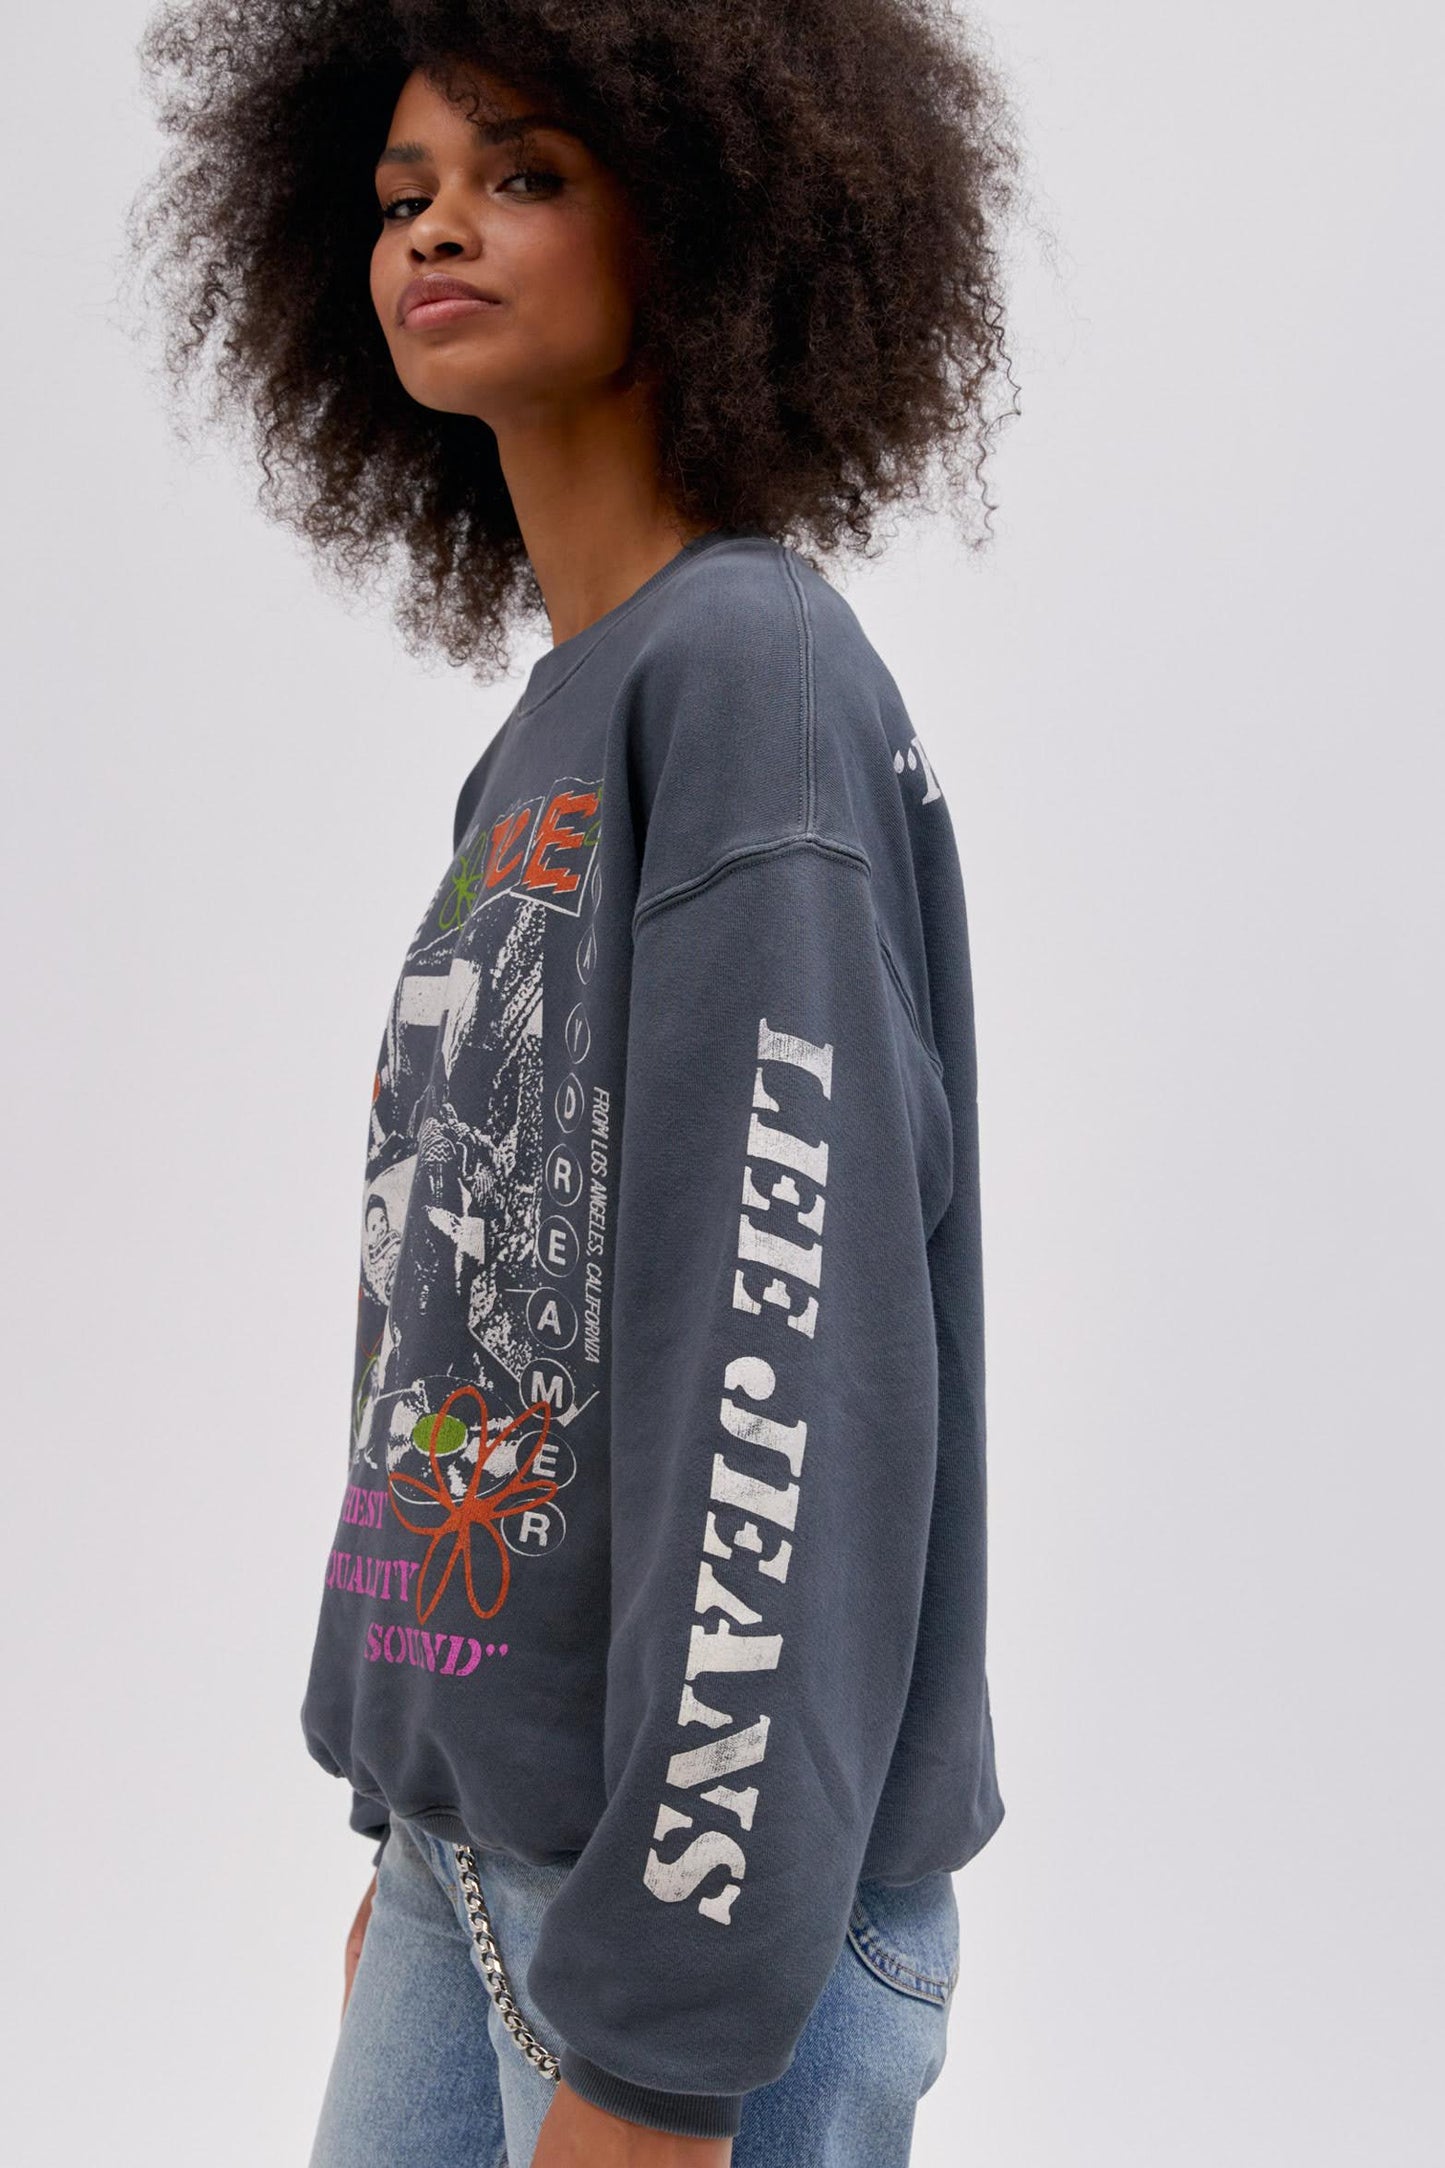 Side profile curly haired model wearing a Lee x Daydreamer collab graphic sweatshirt in washed black.